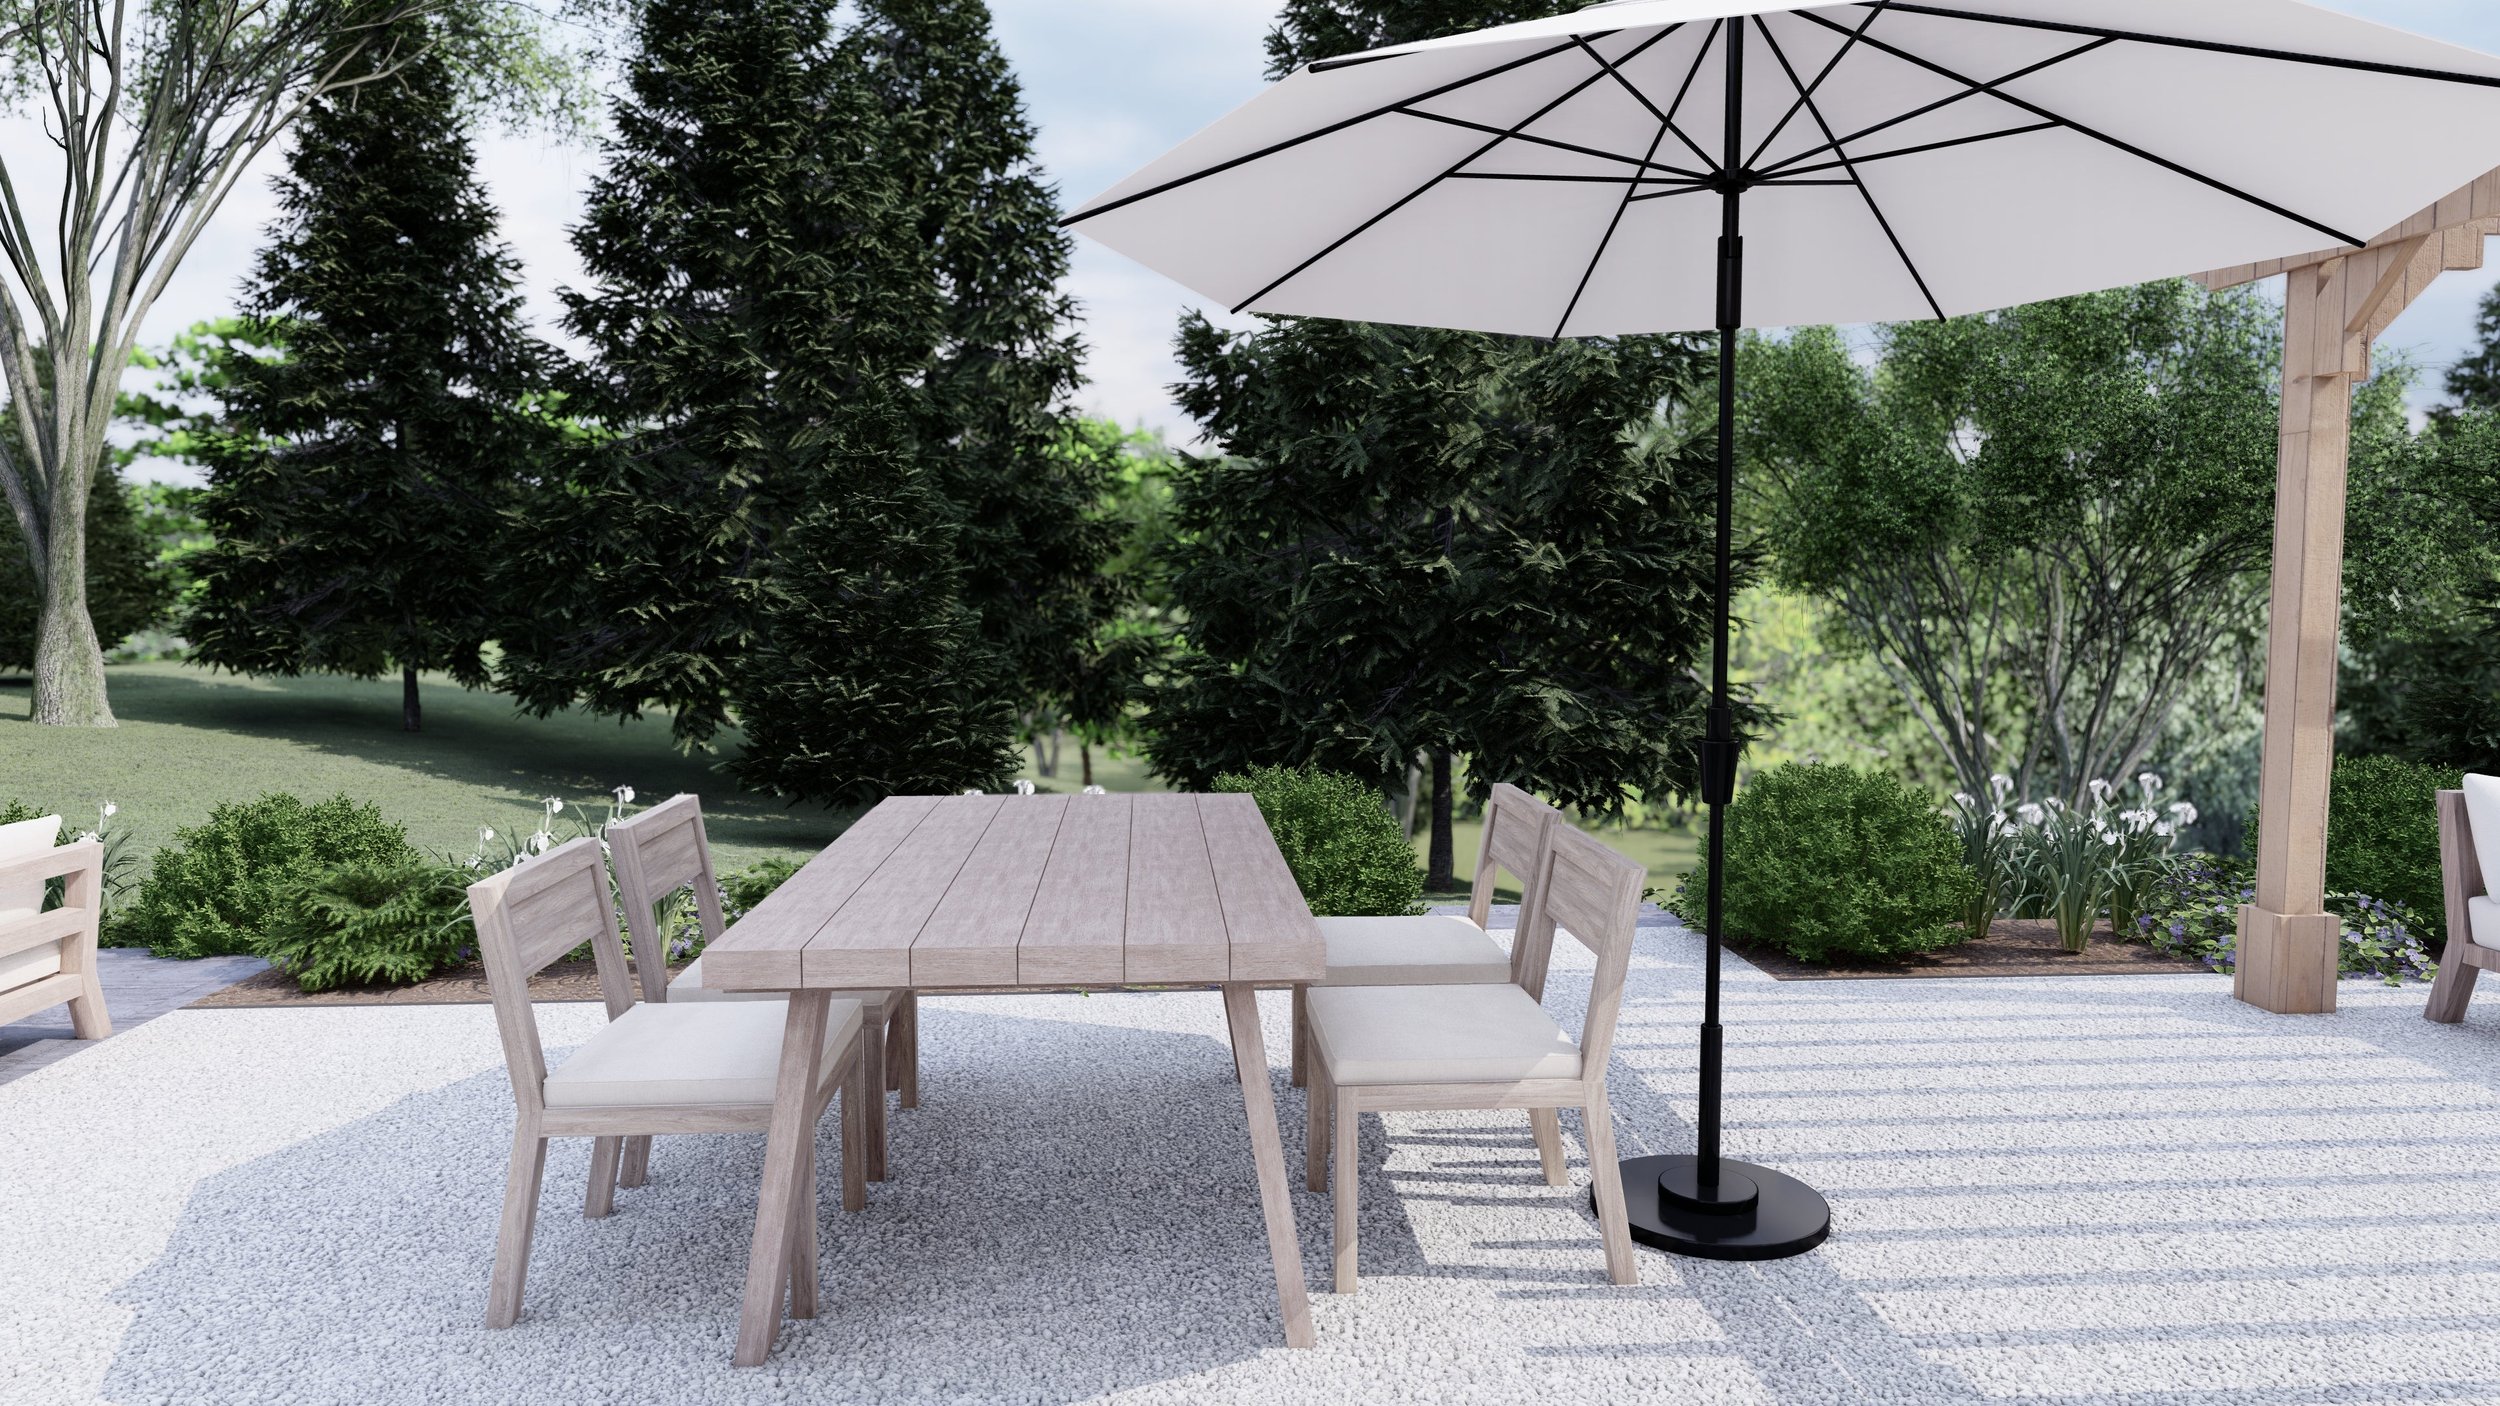 The Merida dining set on a gravel patio in a backyard design for our client in Verona, WI.